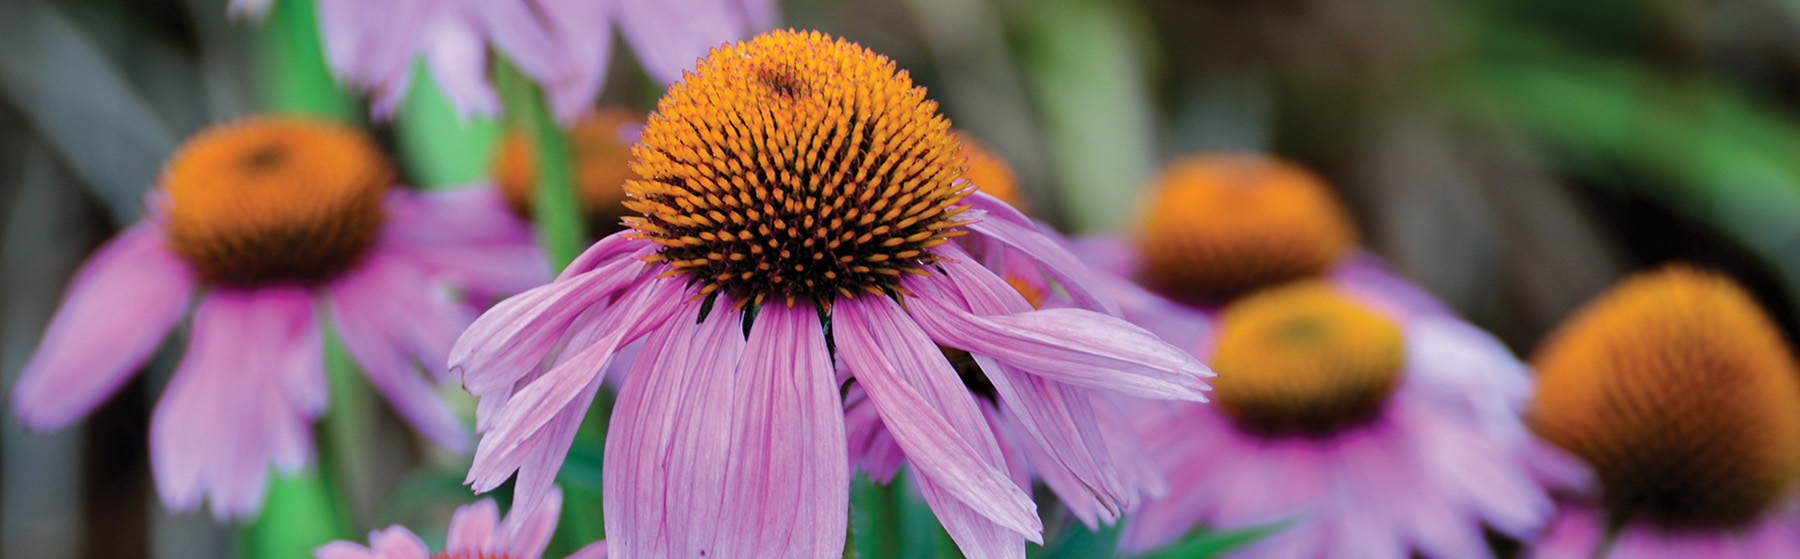 Coneflowers, also known as Echinacea, are tough little native flowers that draw butterflies, bees, and birds to the garden. Trouble-free coneflowers are drought-tolerant once established. They can take the heat! As native plants with prickly stems, they are more deer-resistant than most flowering plants, too. 